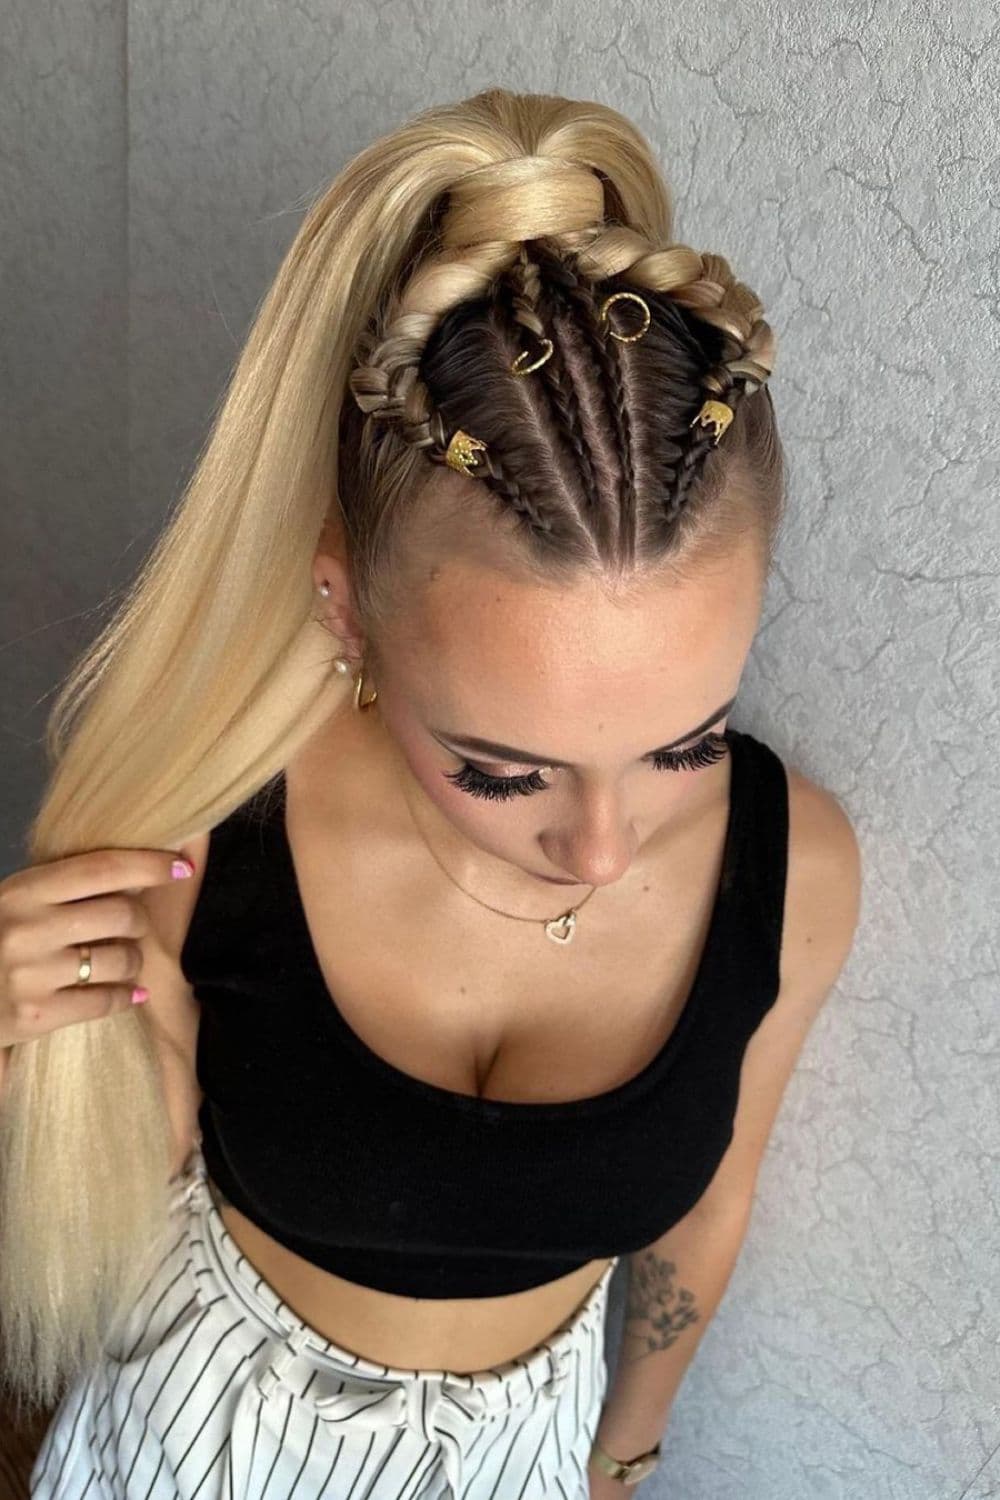 A woman with blonde ponytail with gold braids and cuffs.